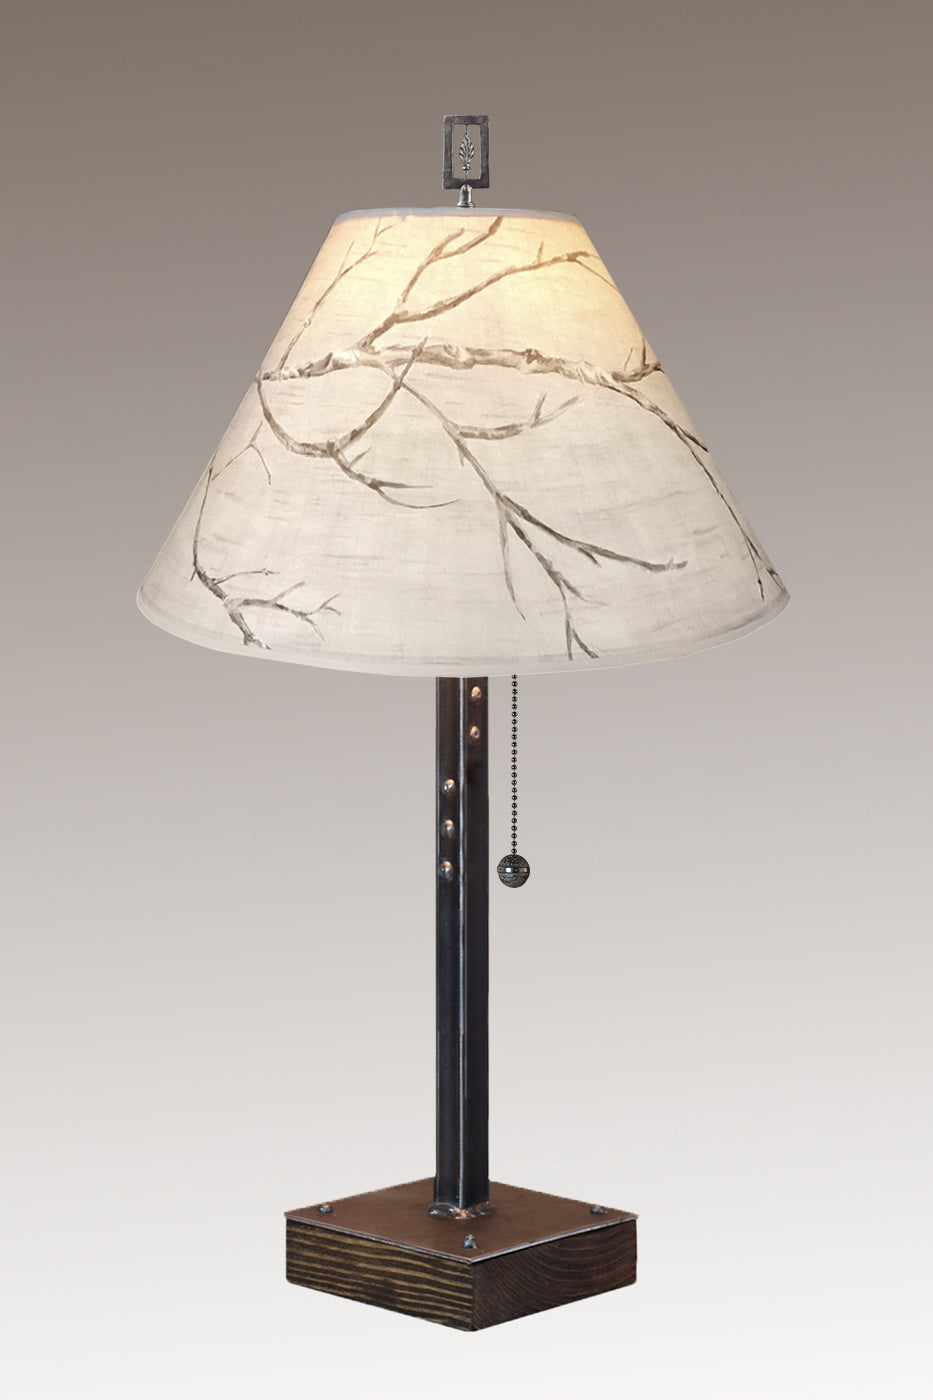 Janna Ugone &amp; Co Table Lamps Steel Table Lamp on Wood with Medium Conical Shade in Sweeping Branch